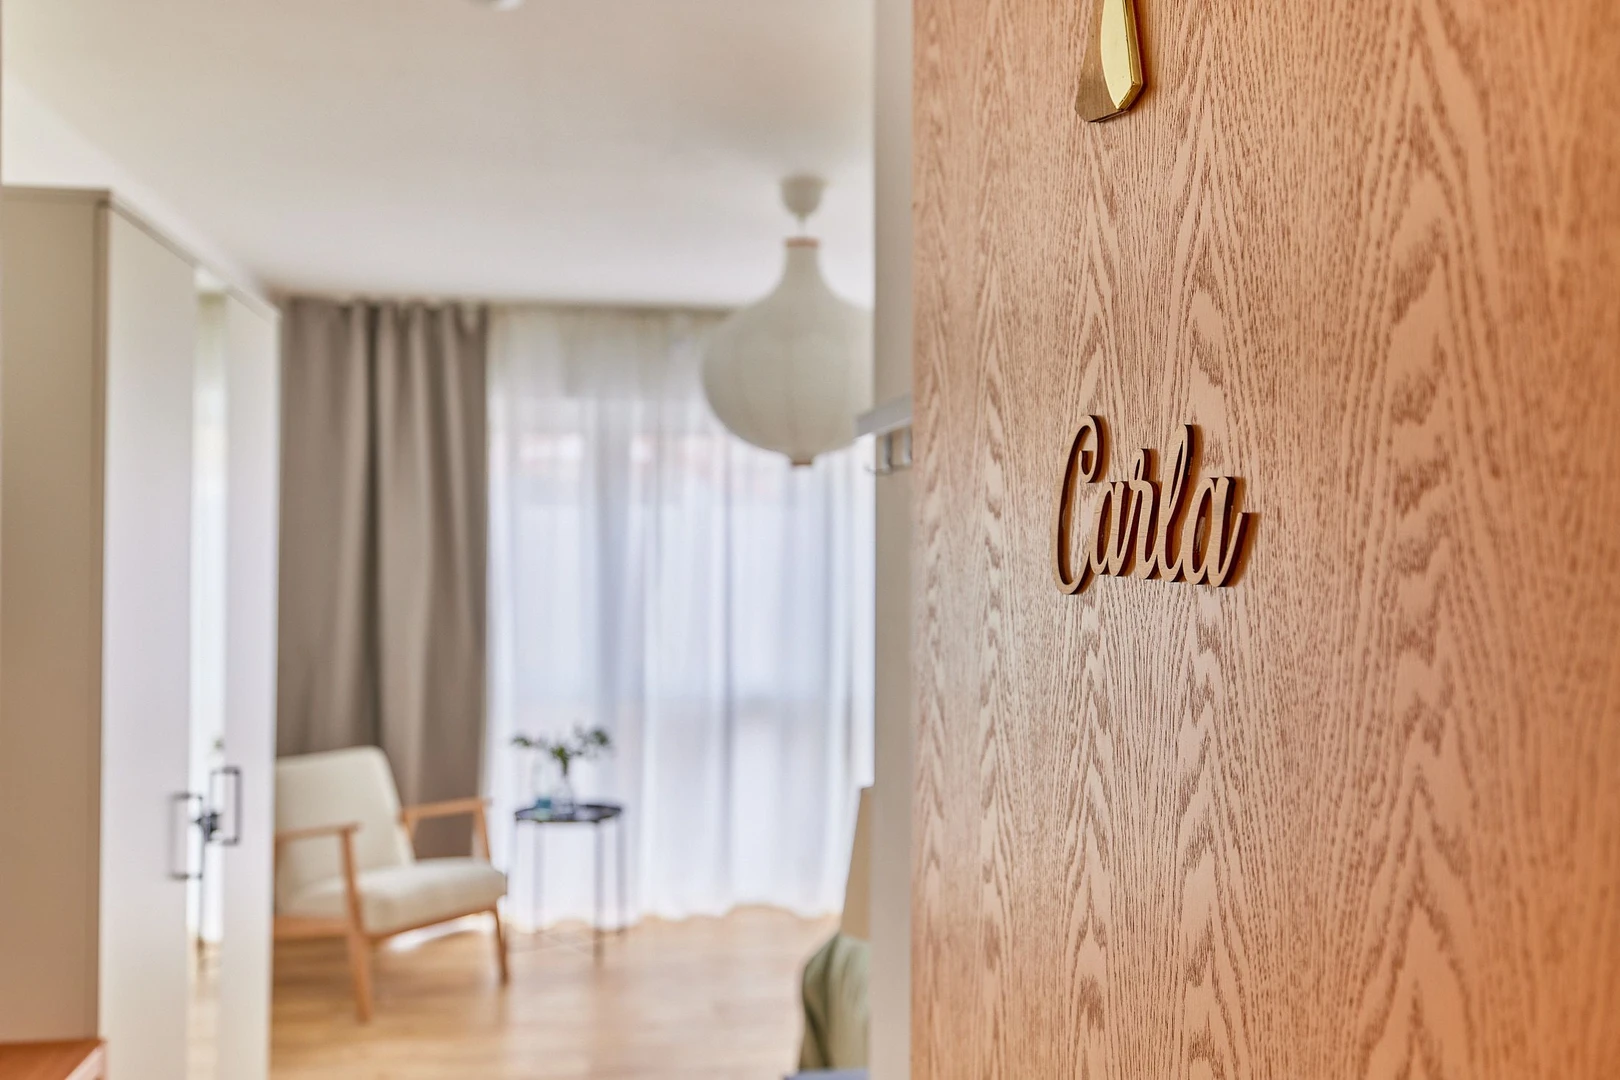 Renting rooms by the month in Kaiserslautern